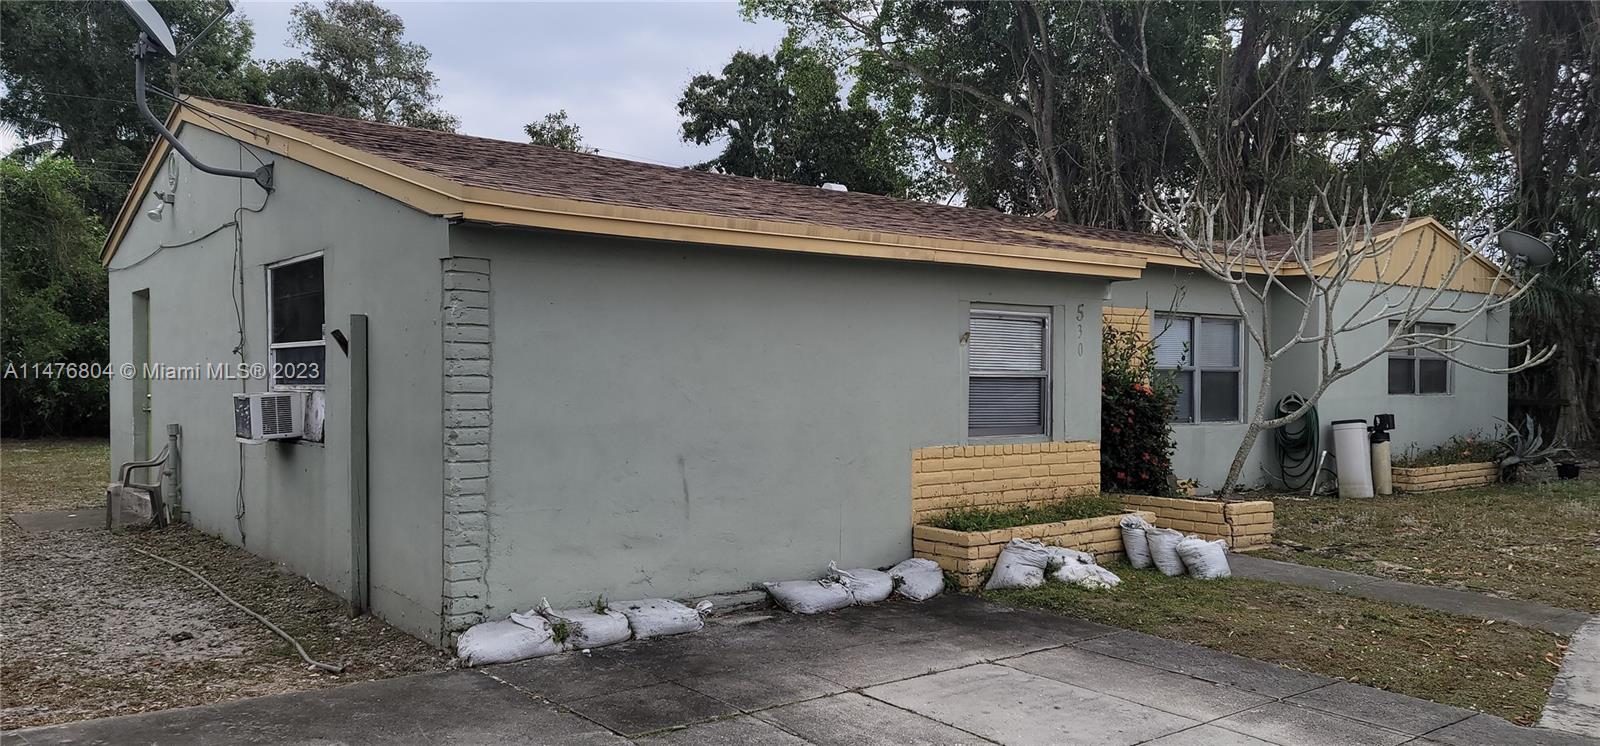 Property for Sale at Address Not Disclosed, Fort Lauderdale, Broward County, Florida - Bedrooms: 3 
Bathrooms: 2  - $229,000